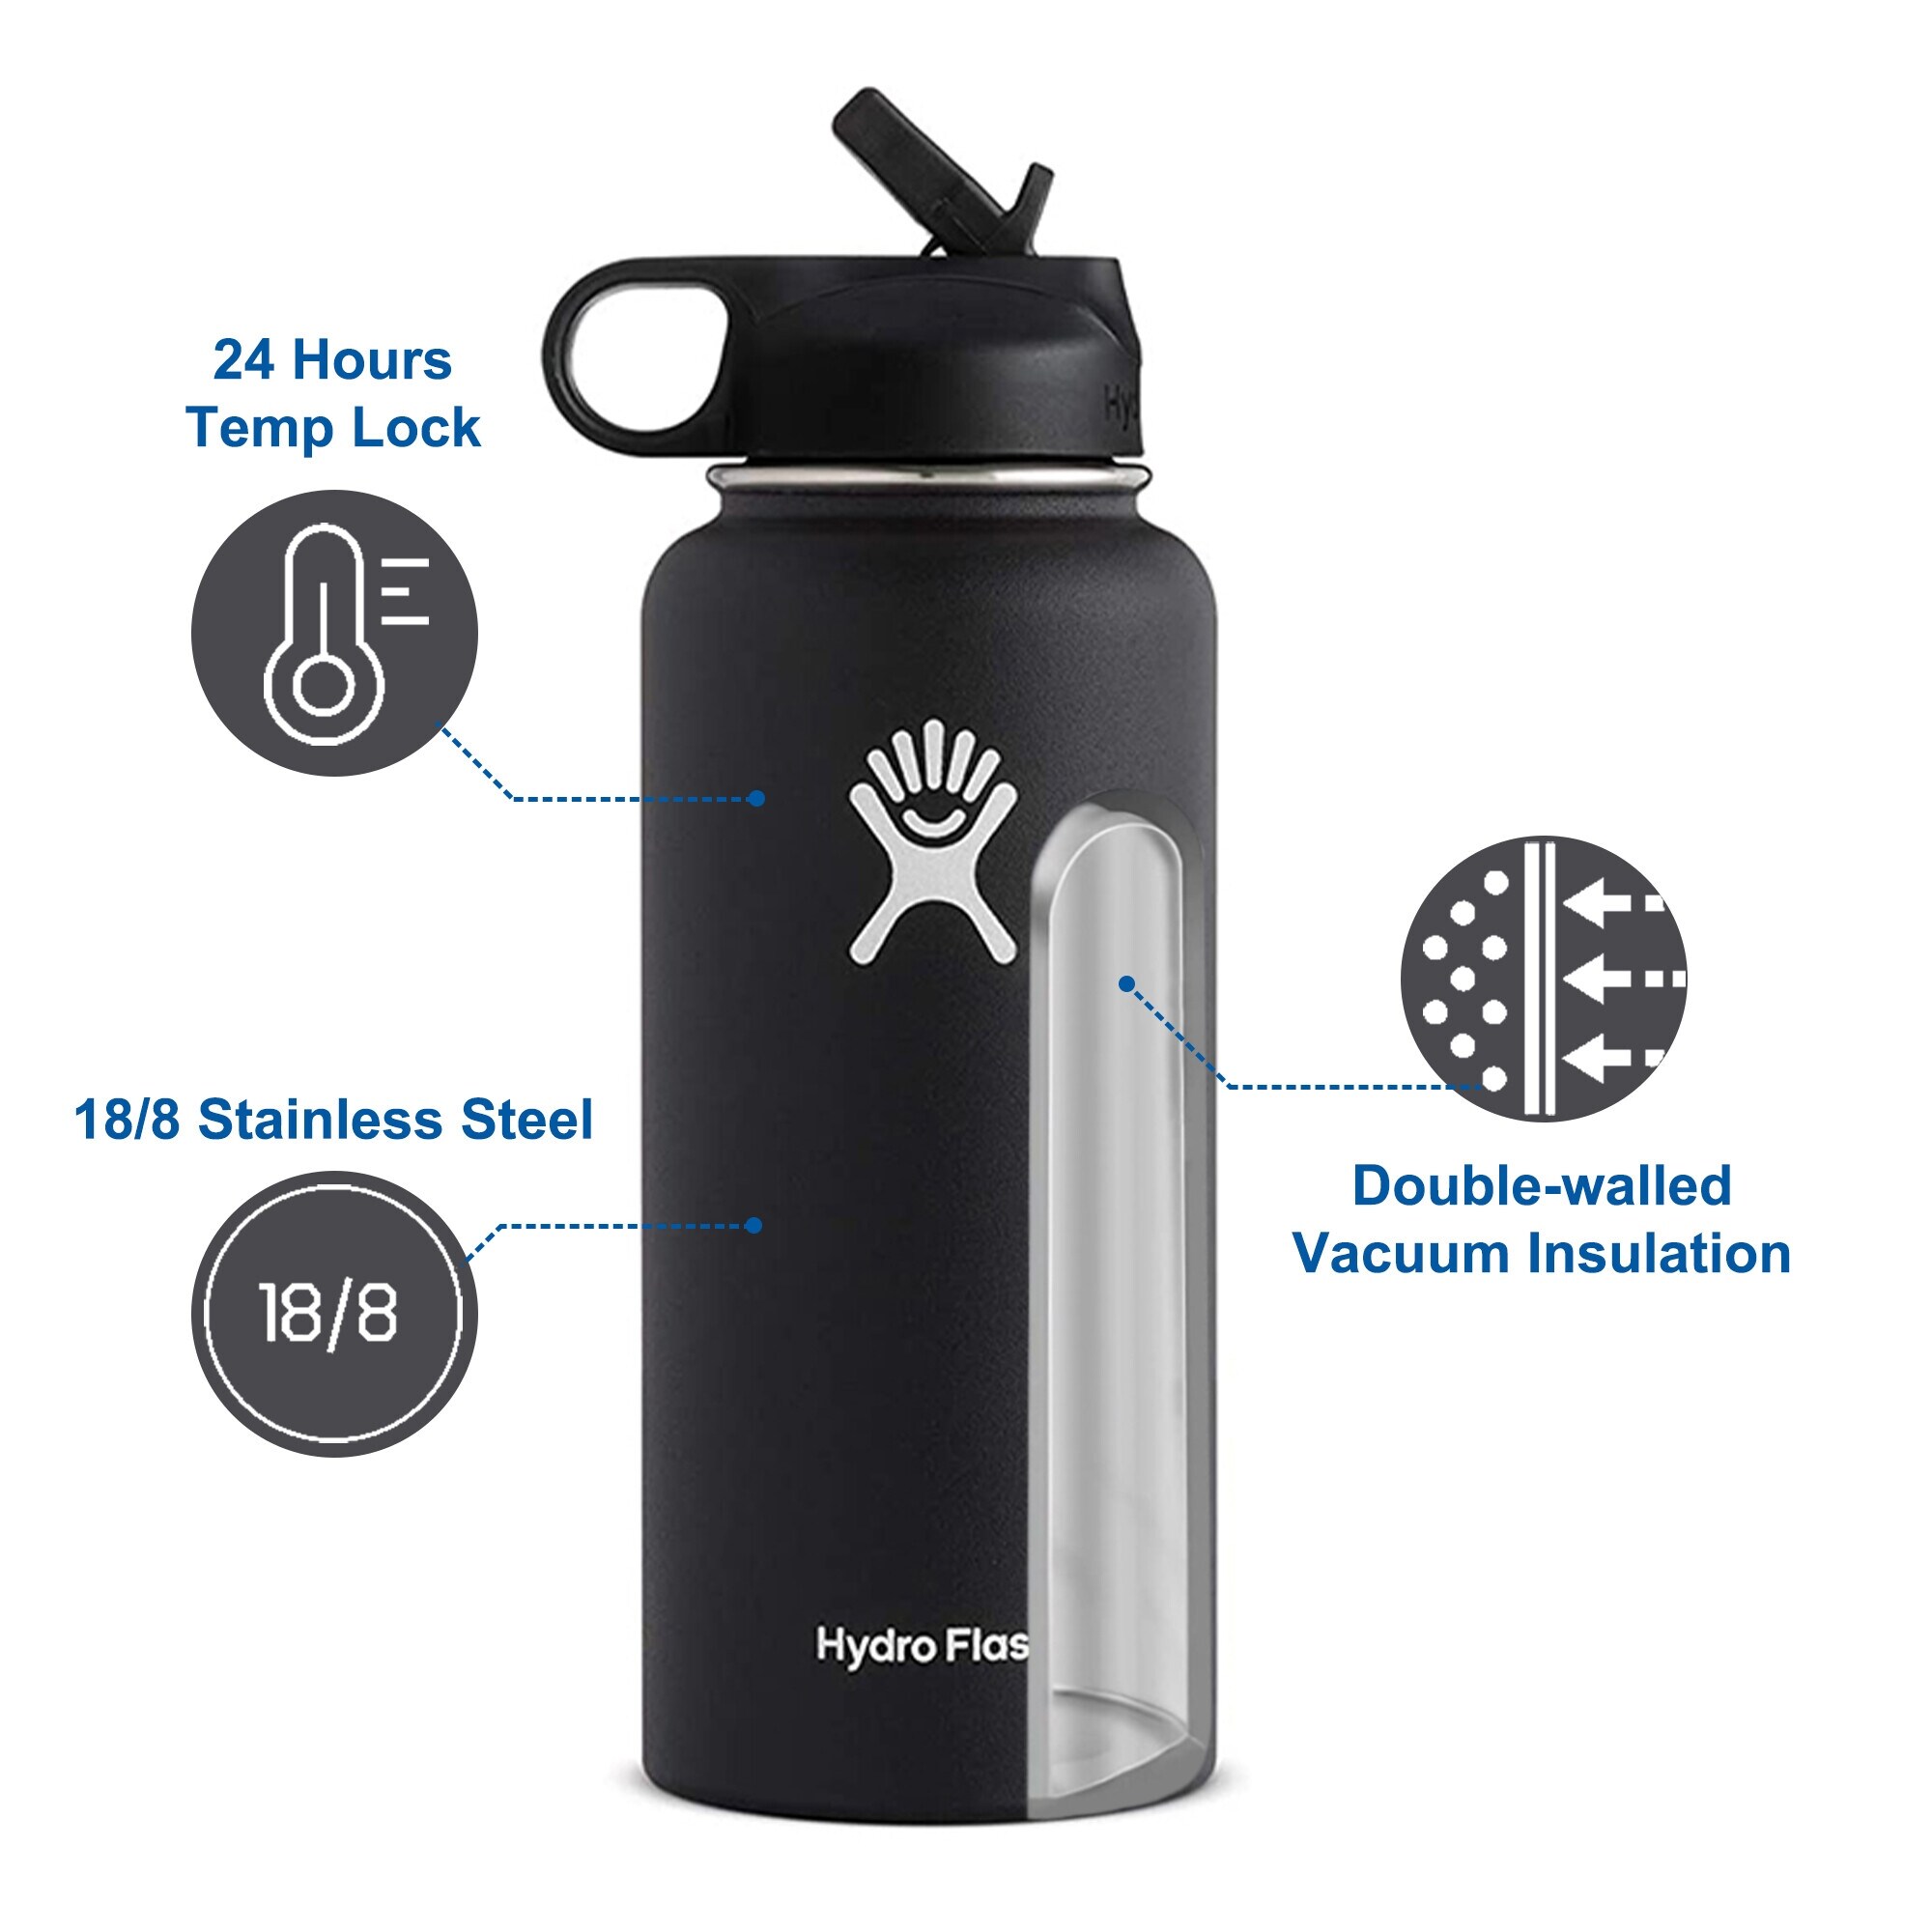 https://ak1.ostkcdn.com/images/products/is/images/direct/9d411ddeaec3fcdcc46b9934b1a72750fe246f57/Hydro-Flask-32oz-Vacuum-Insulated-Stainless-Steel-Water-Bottle-Wide-Mouth-with-Straw-Lid.jpg